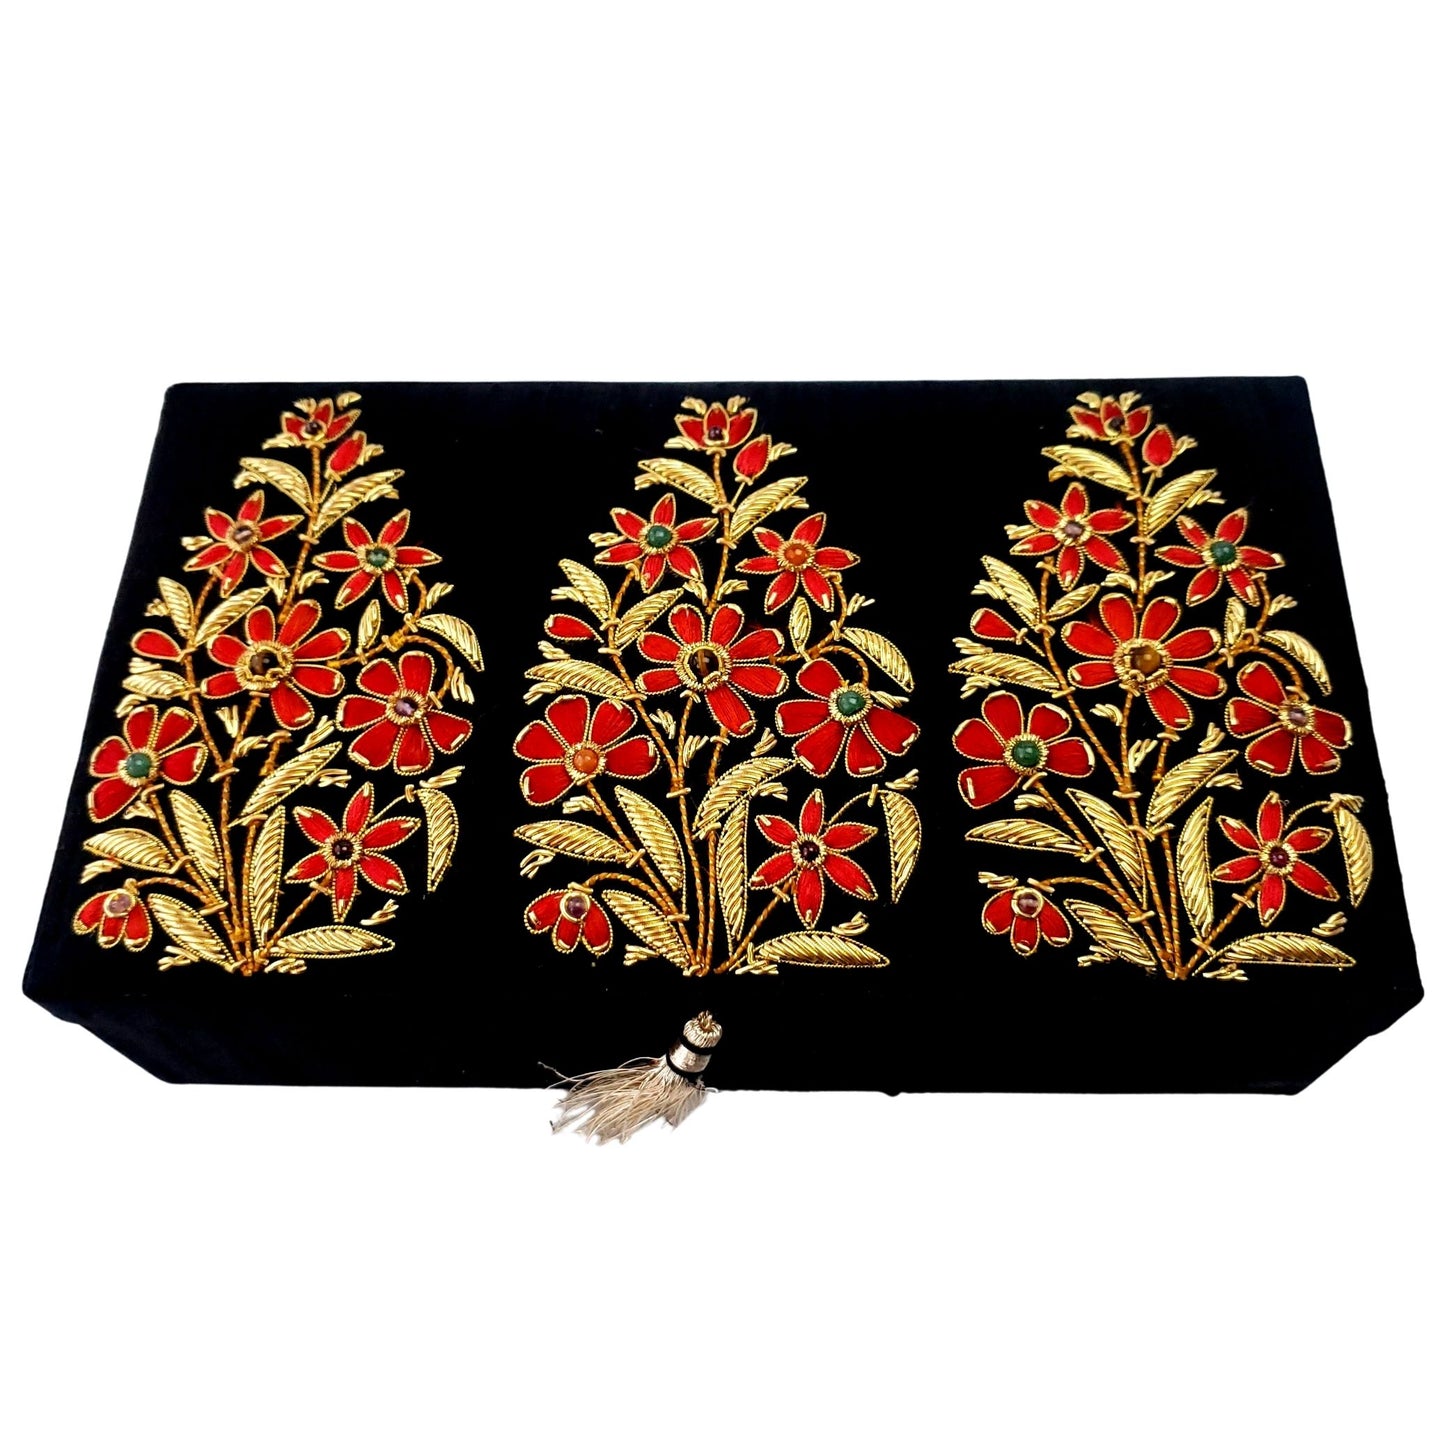 Black silk keepsake box embroidered with gold red flowers.